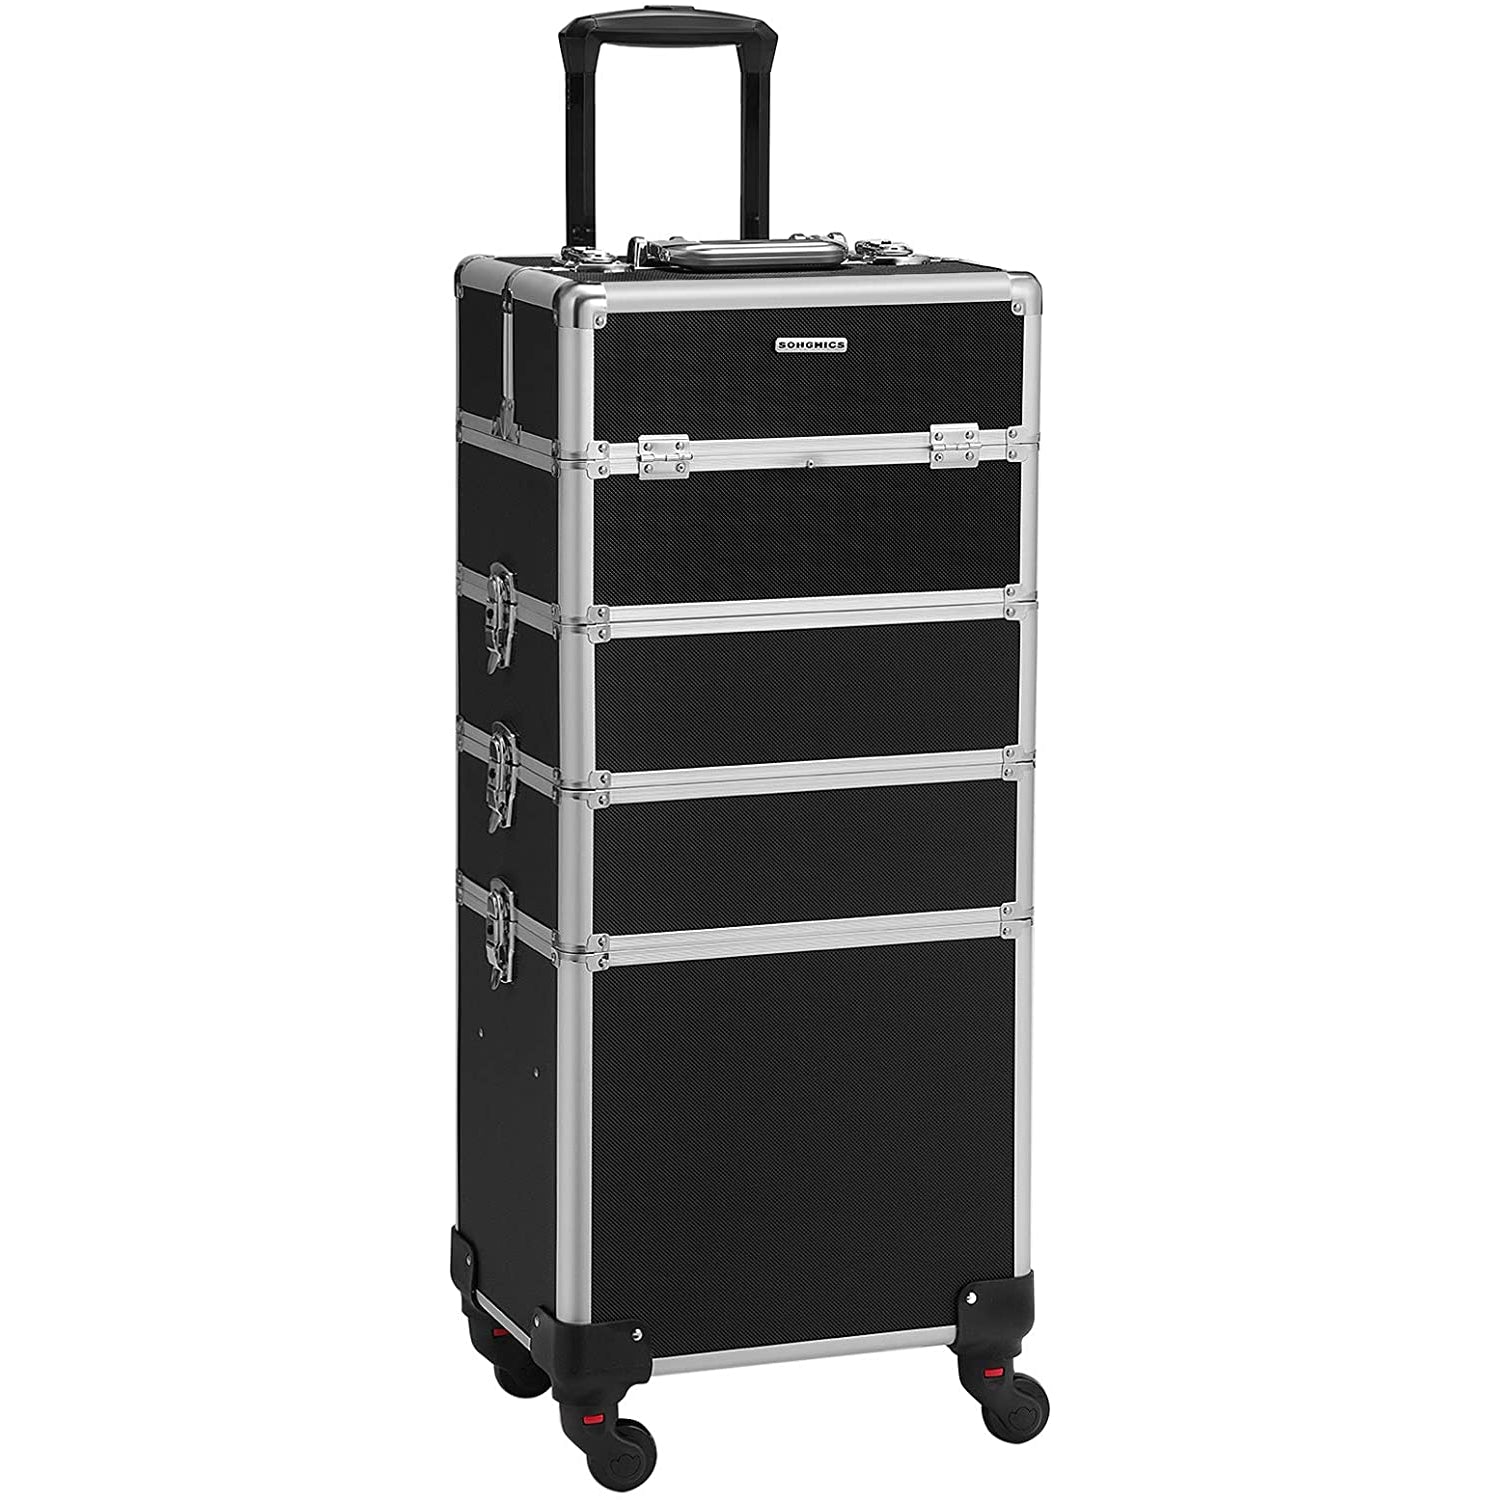 Nancy's Cosmetics Suitcase - Make-up Suitcase - Make-up Trolley